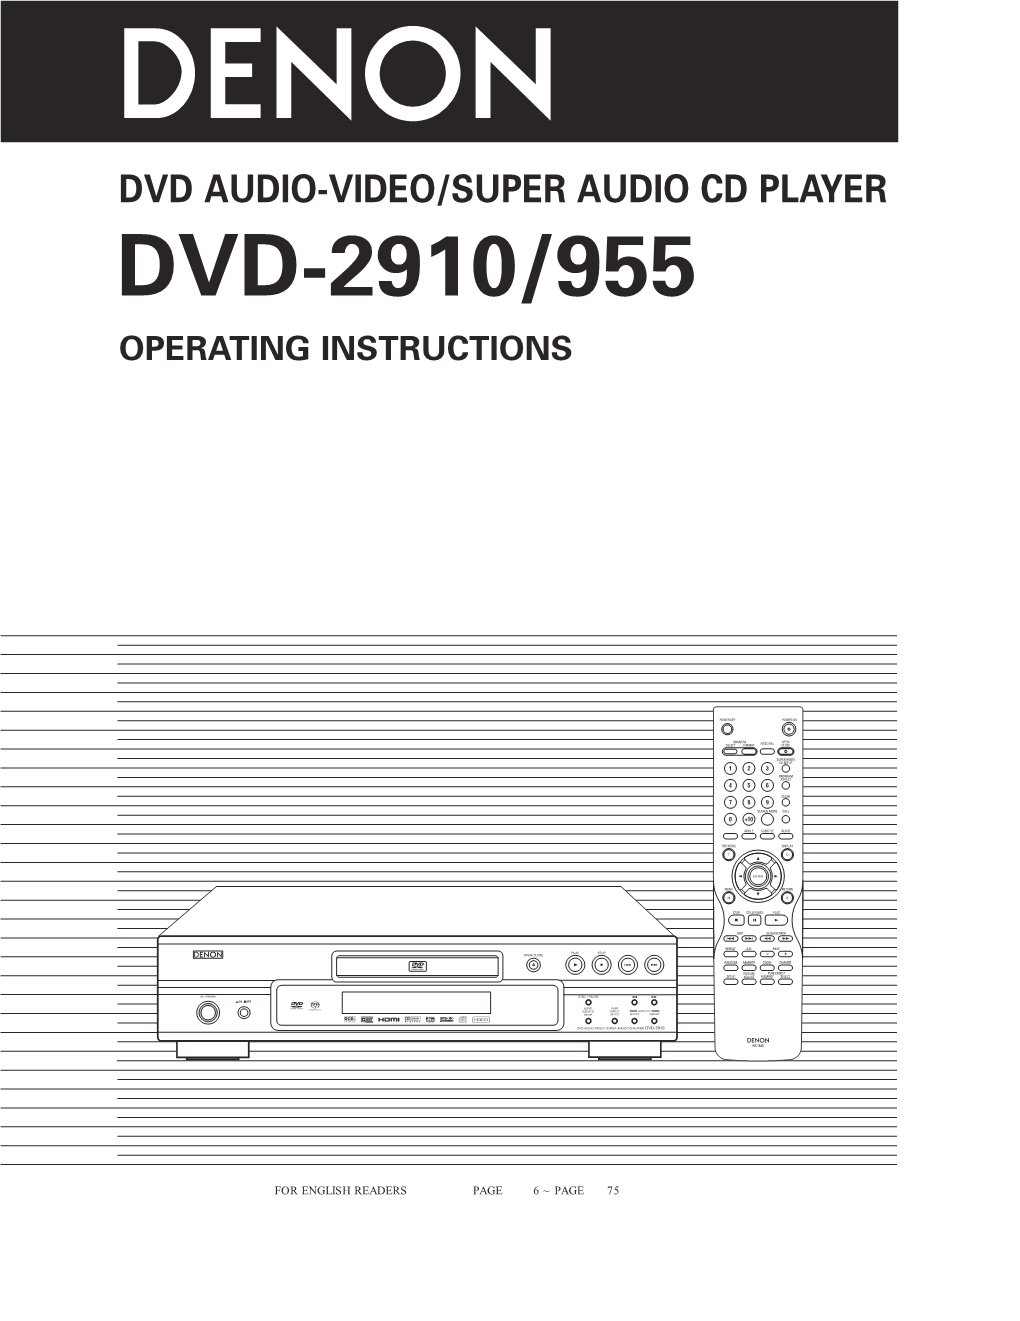 Dvd-2910/955 Operating Instructions